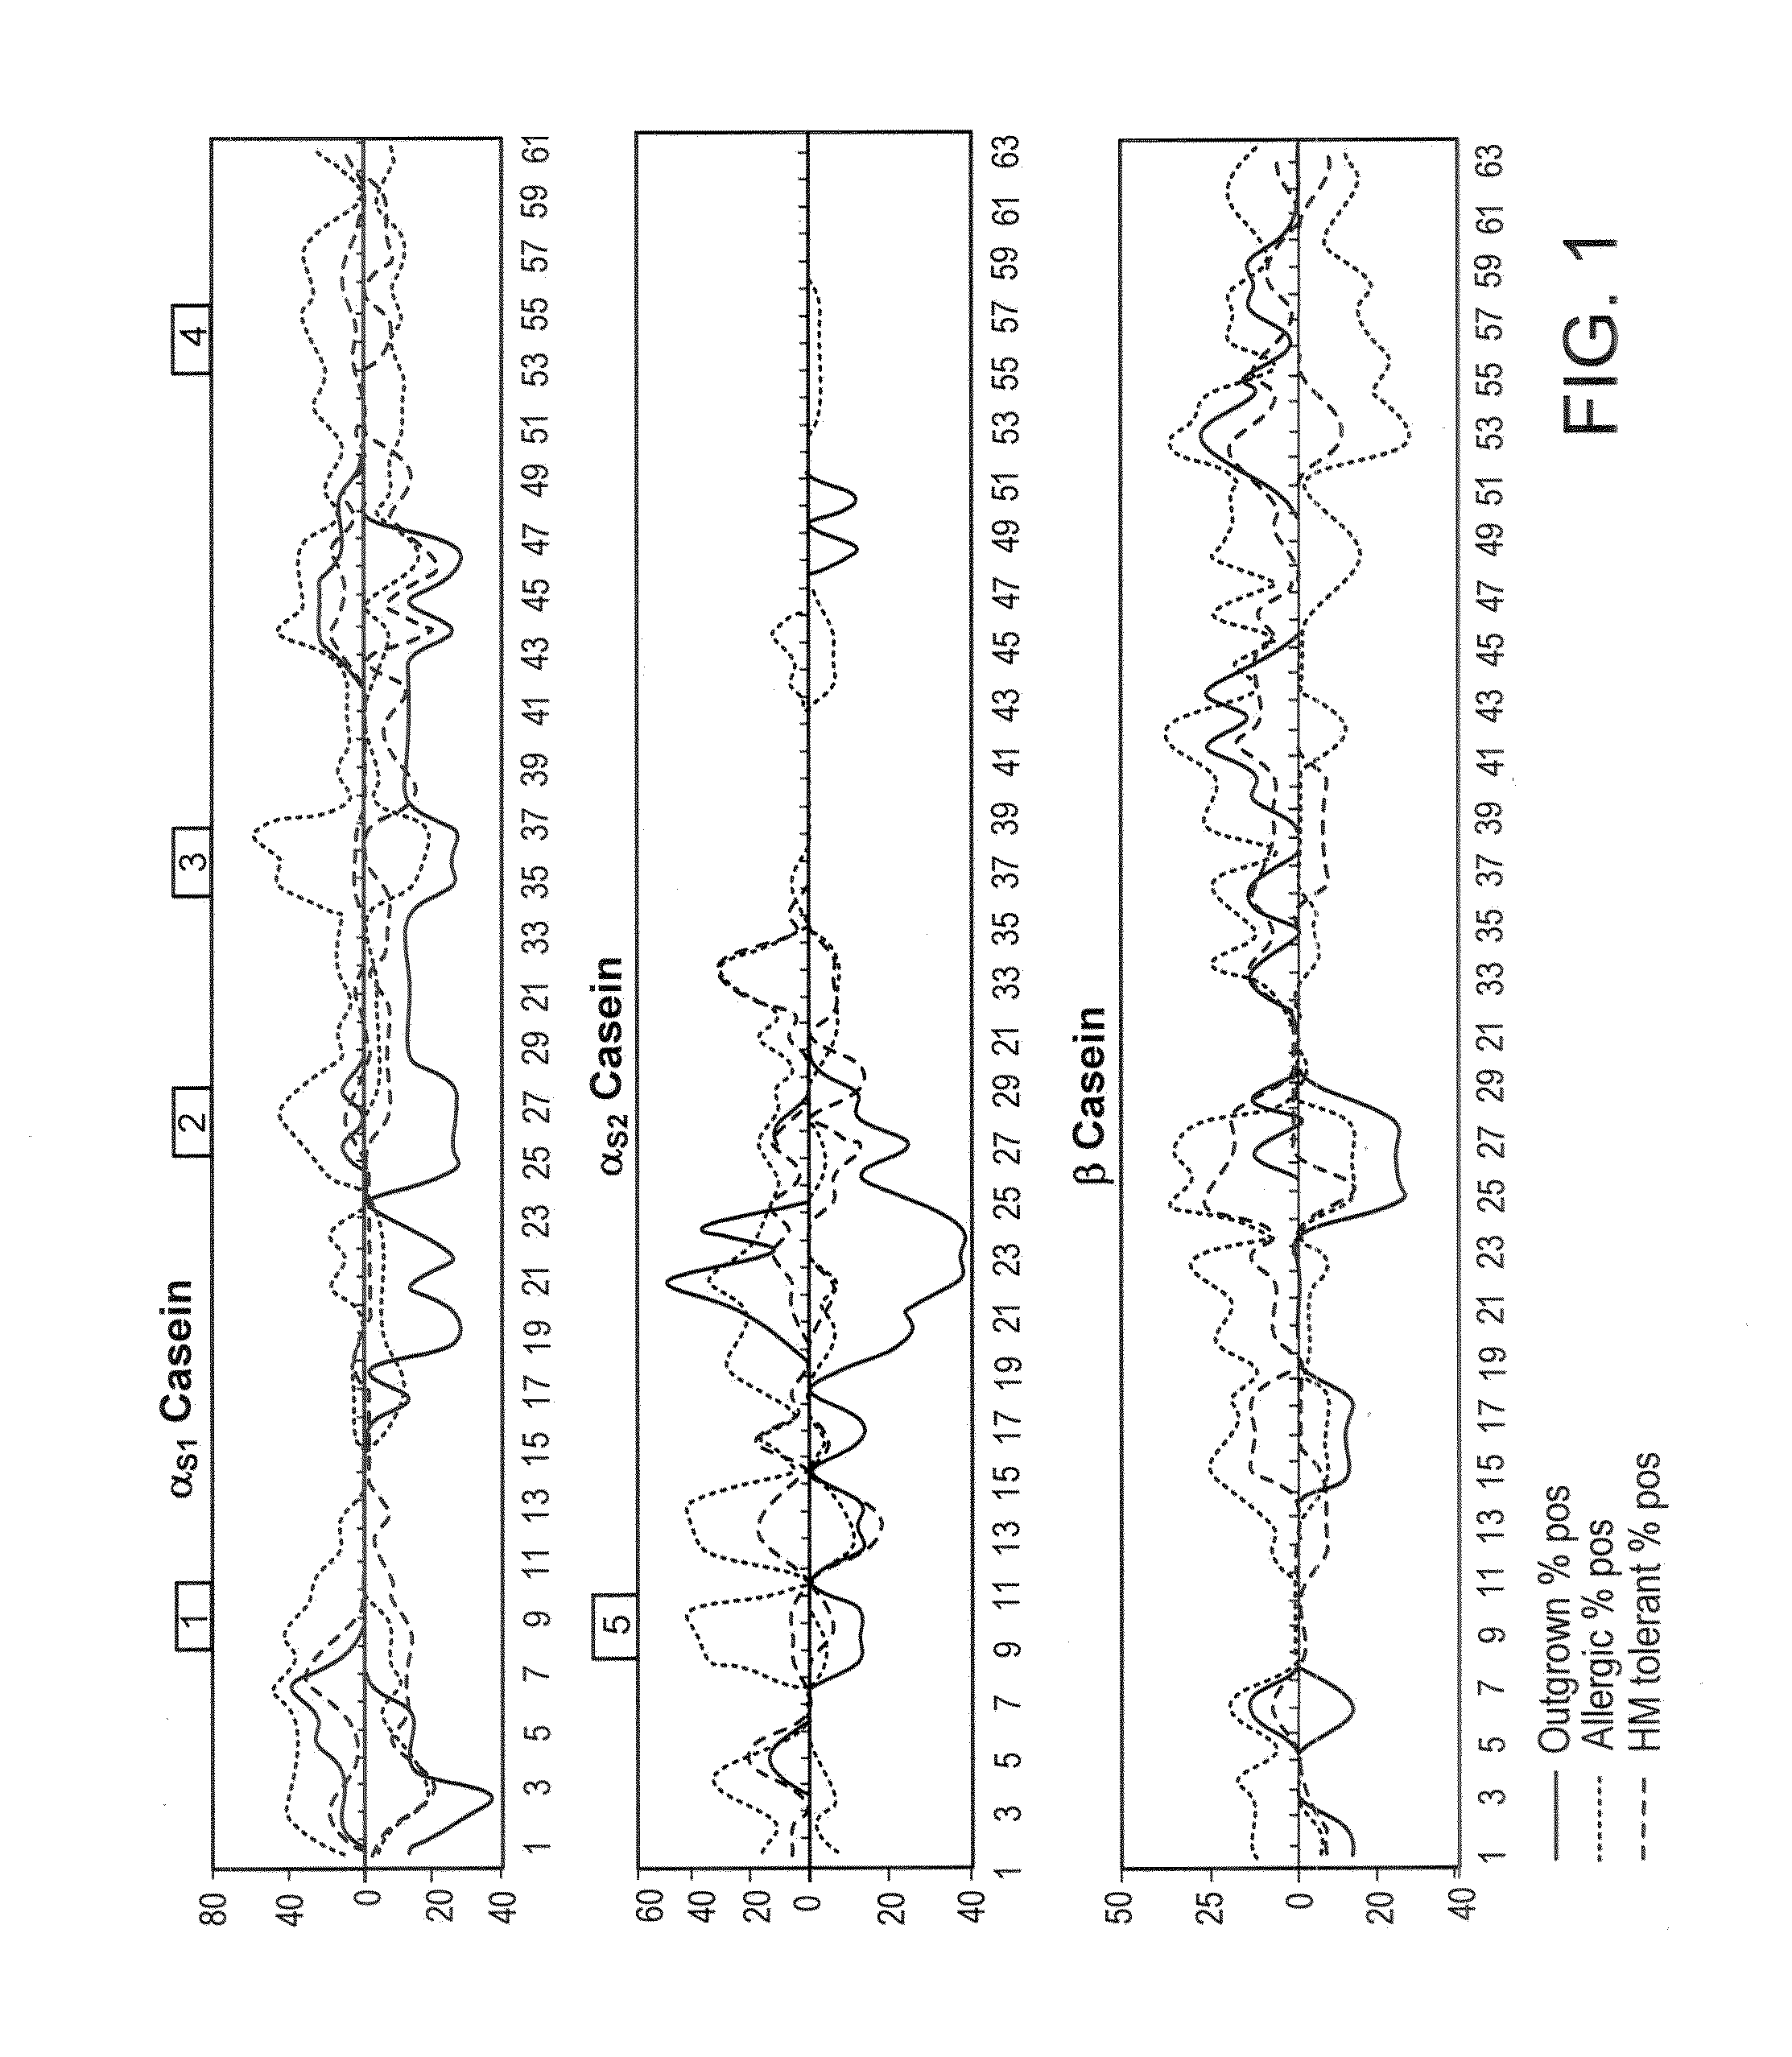 Methods for characterizing antibody binding affinity and epitope diversity in food allergy